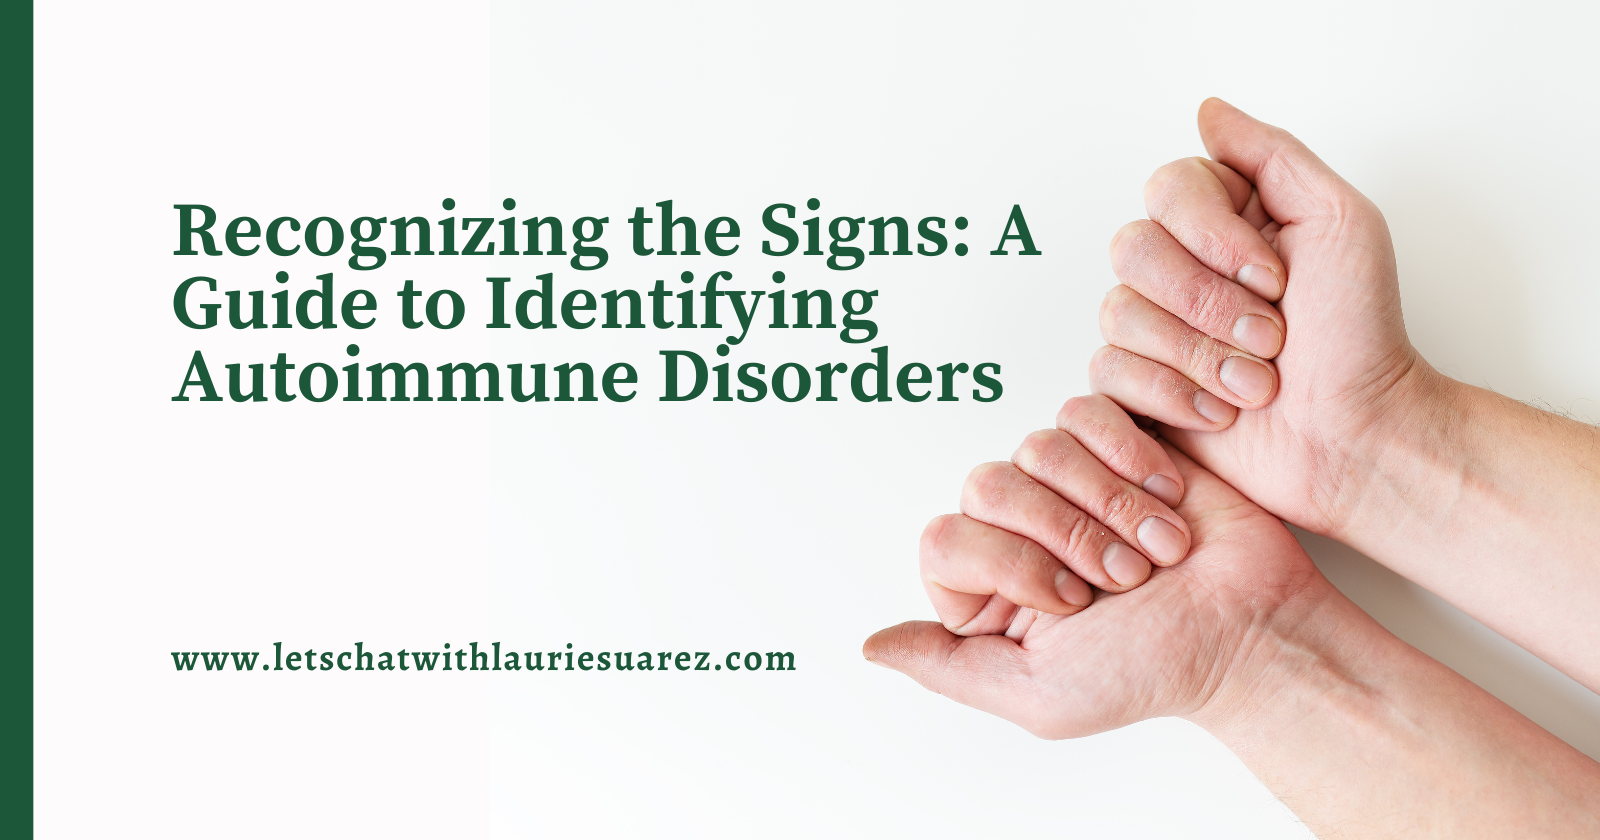 Recognizing the Signs of Autoimmune Disorders